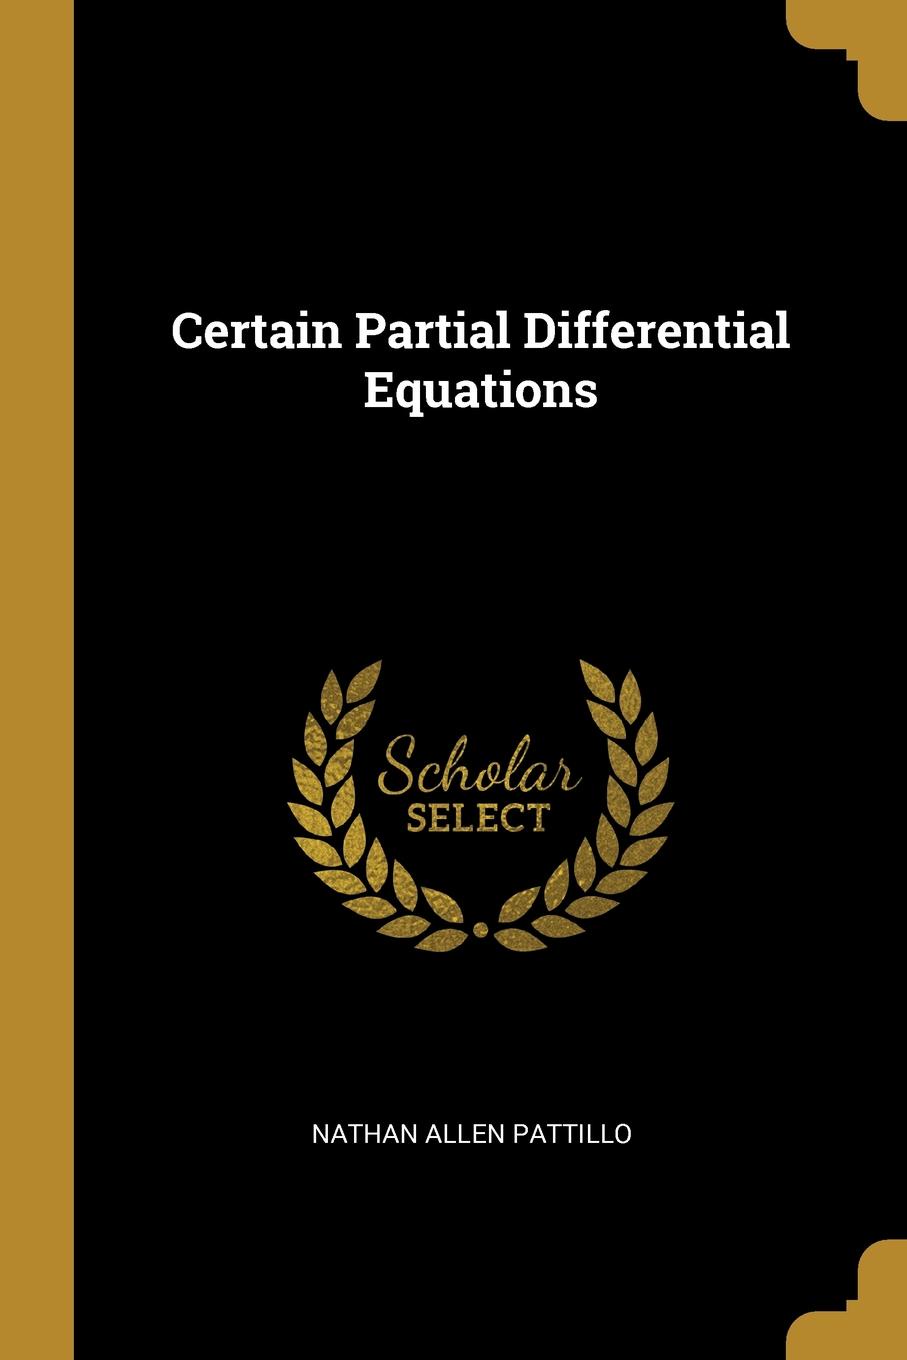 Certain Partial Differential Equations